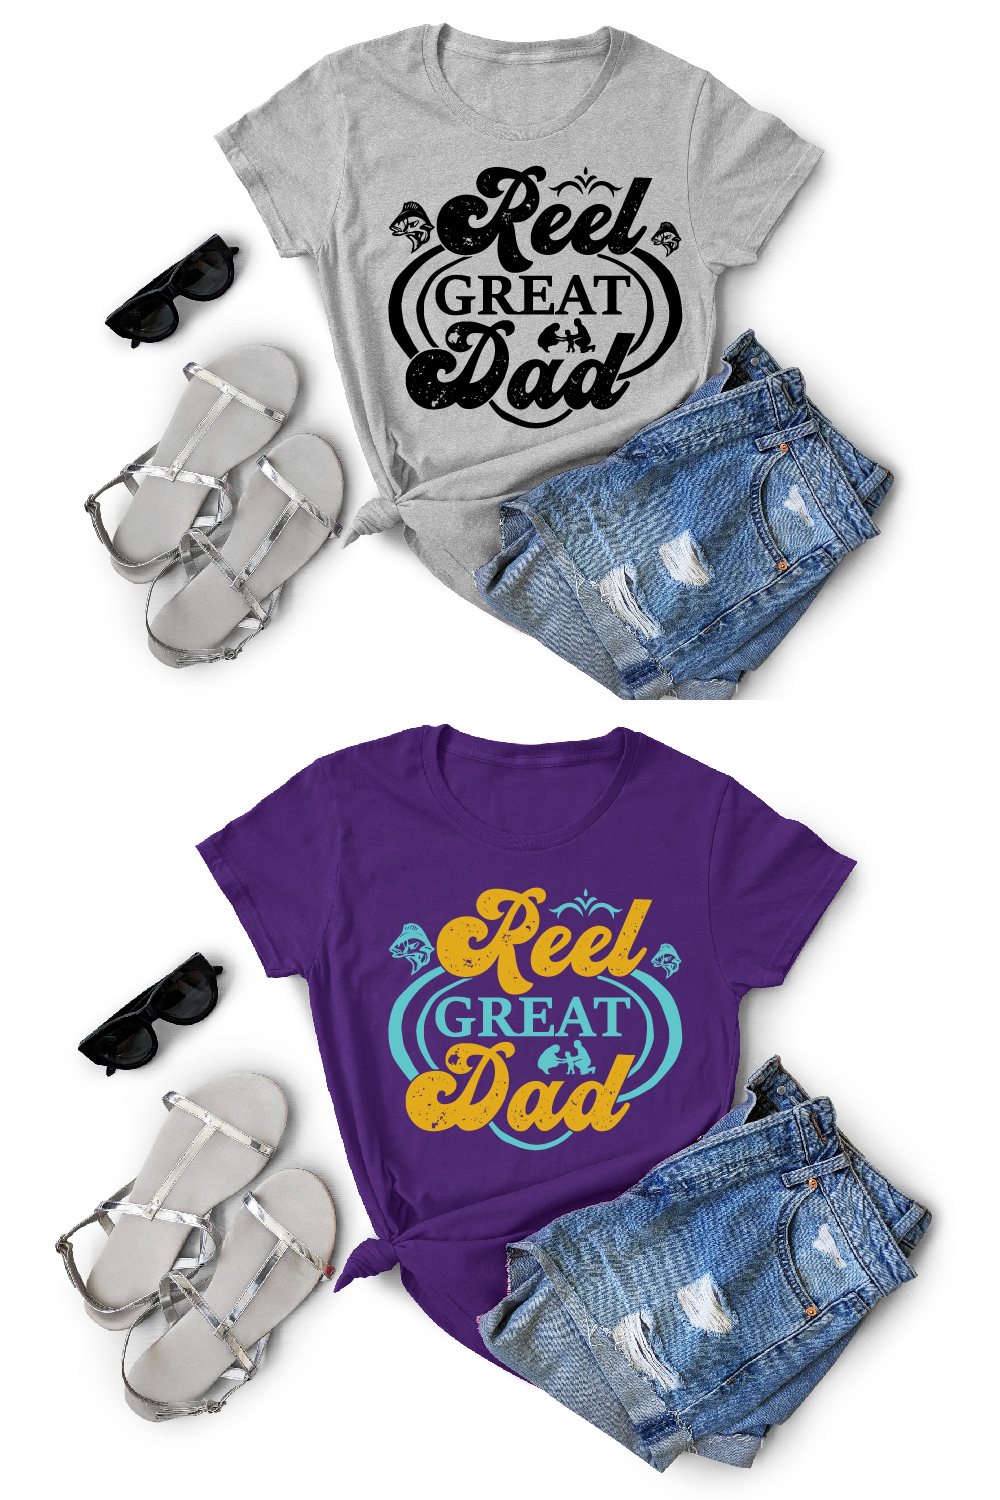 Reel Great dad T-Shirt Free File Design pinterest preview image.